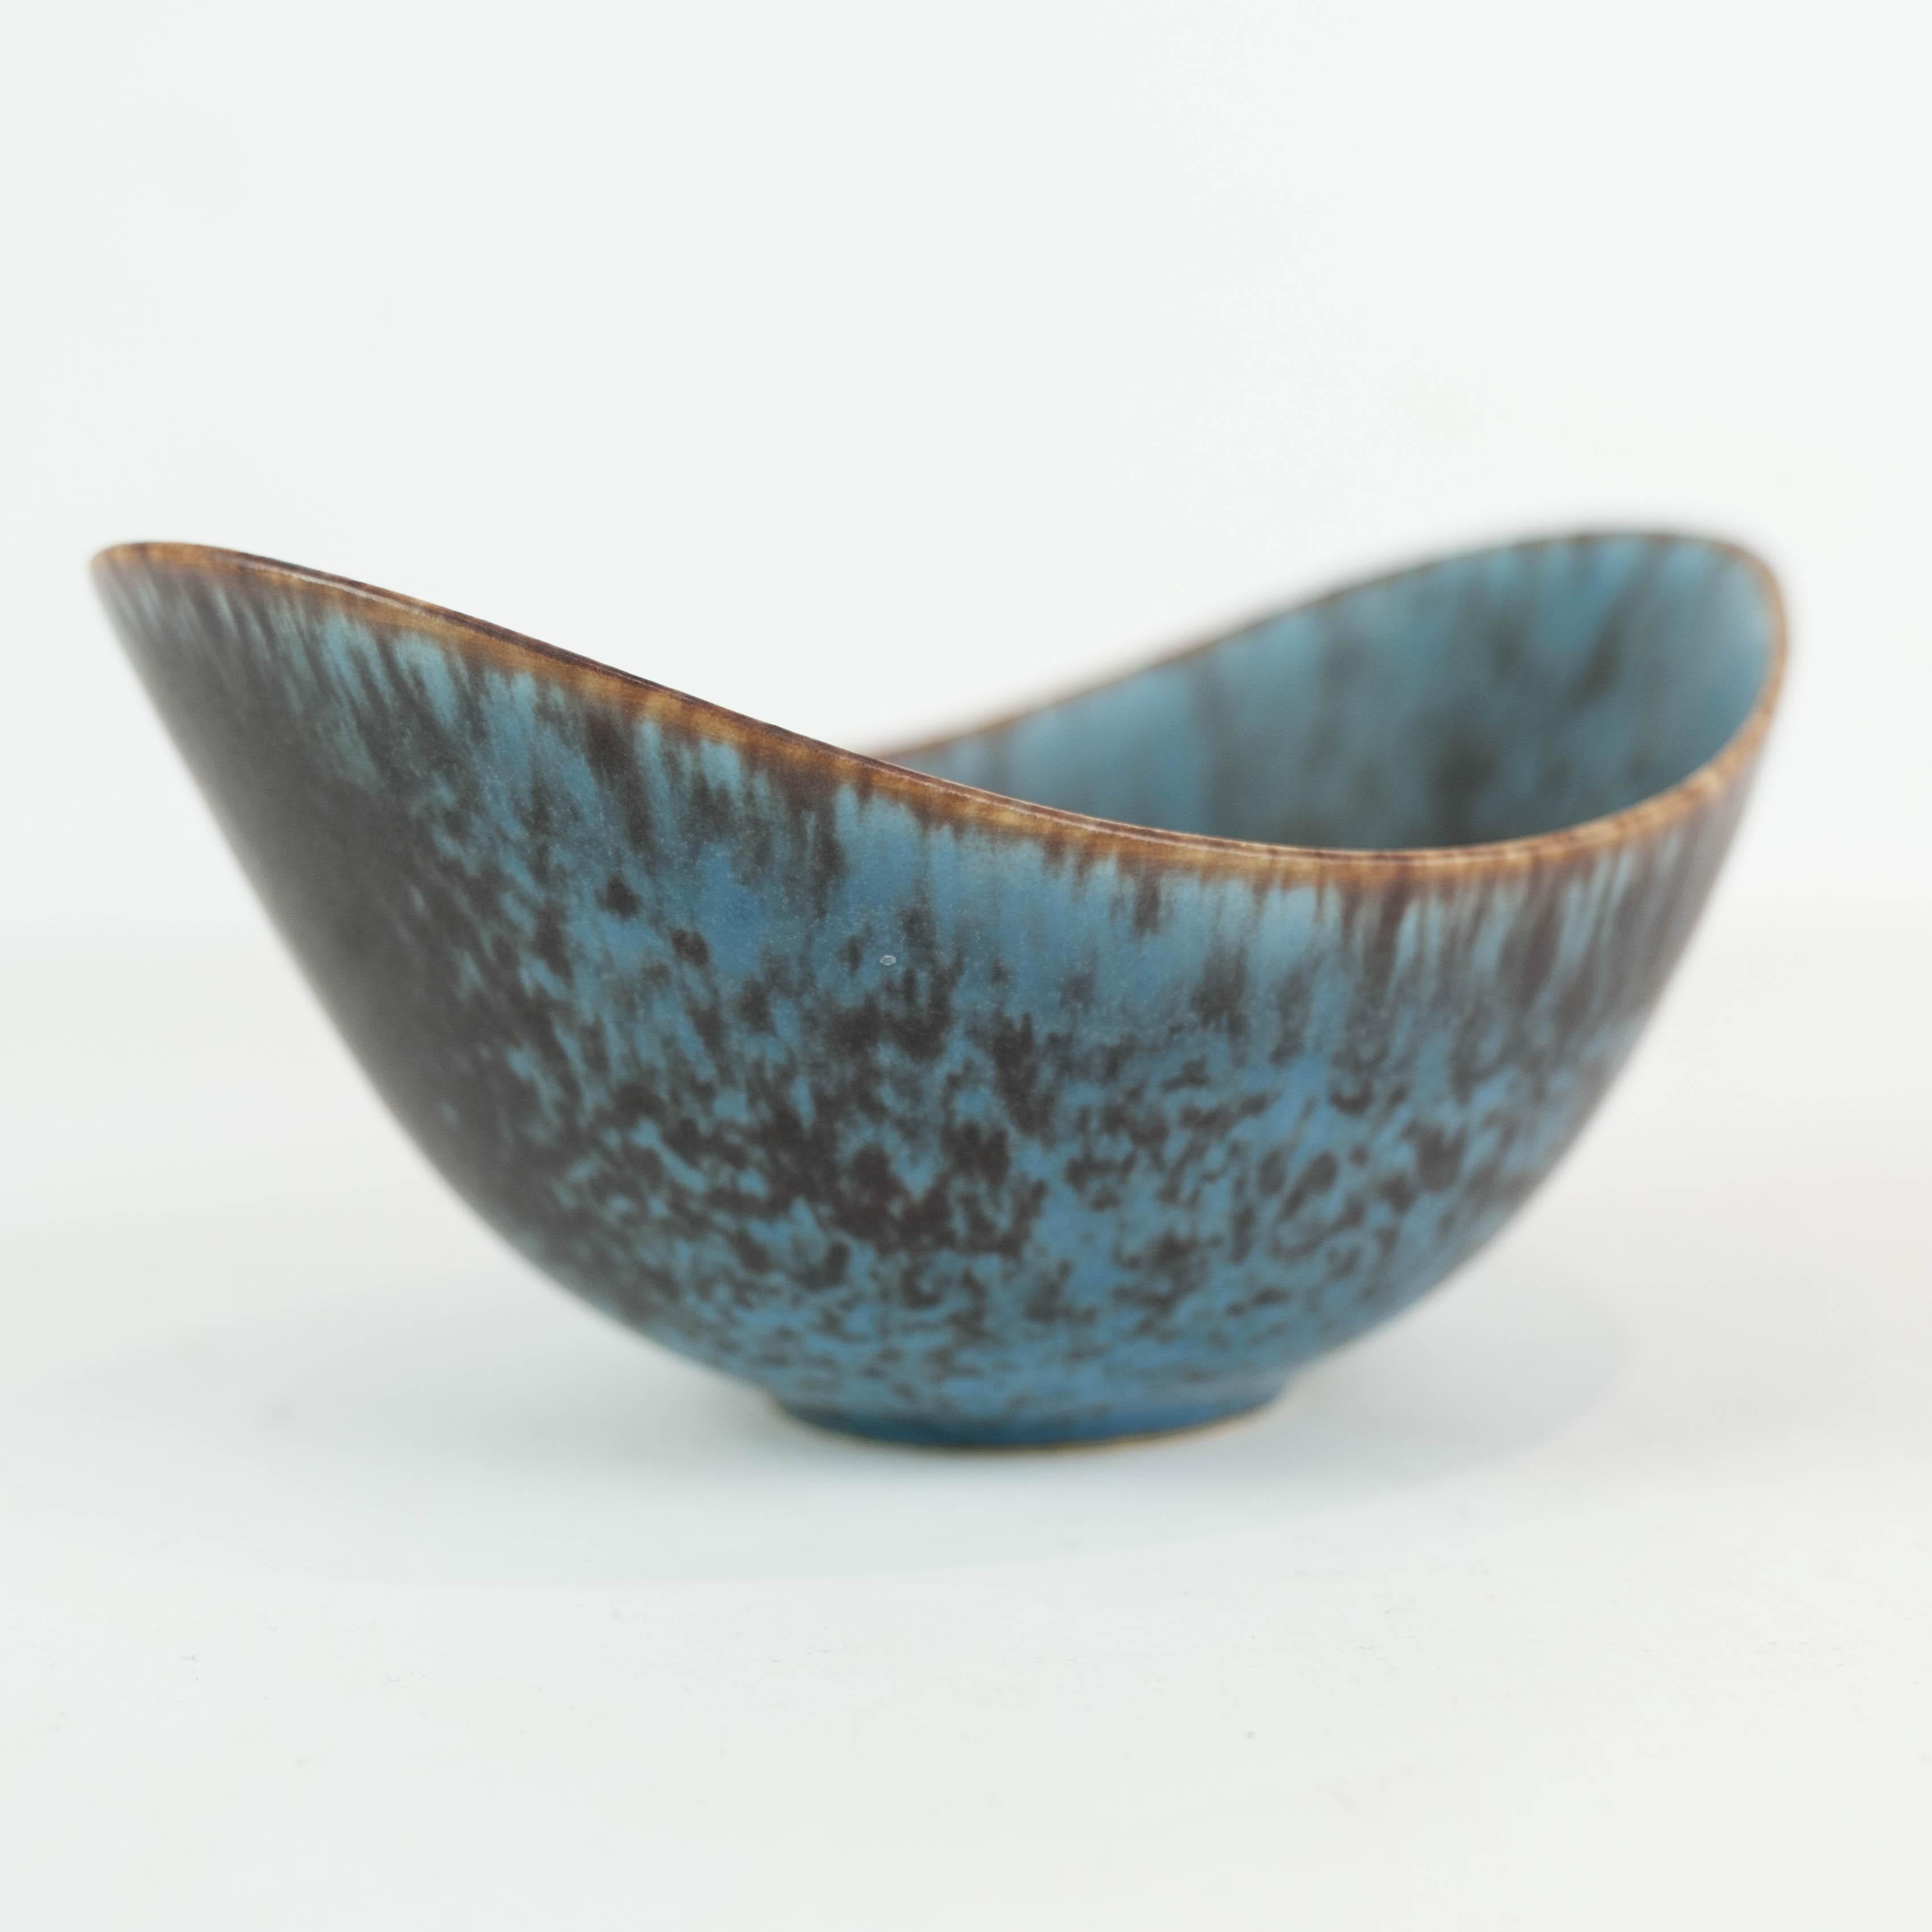 Ceramic bowl with blue and brown glace by the artist Gunnar Nylund for Rørstrand. The bowl is in great vintage condition.